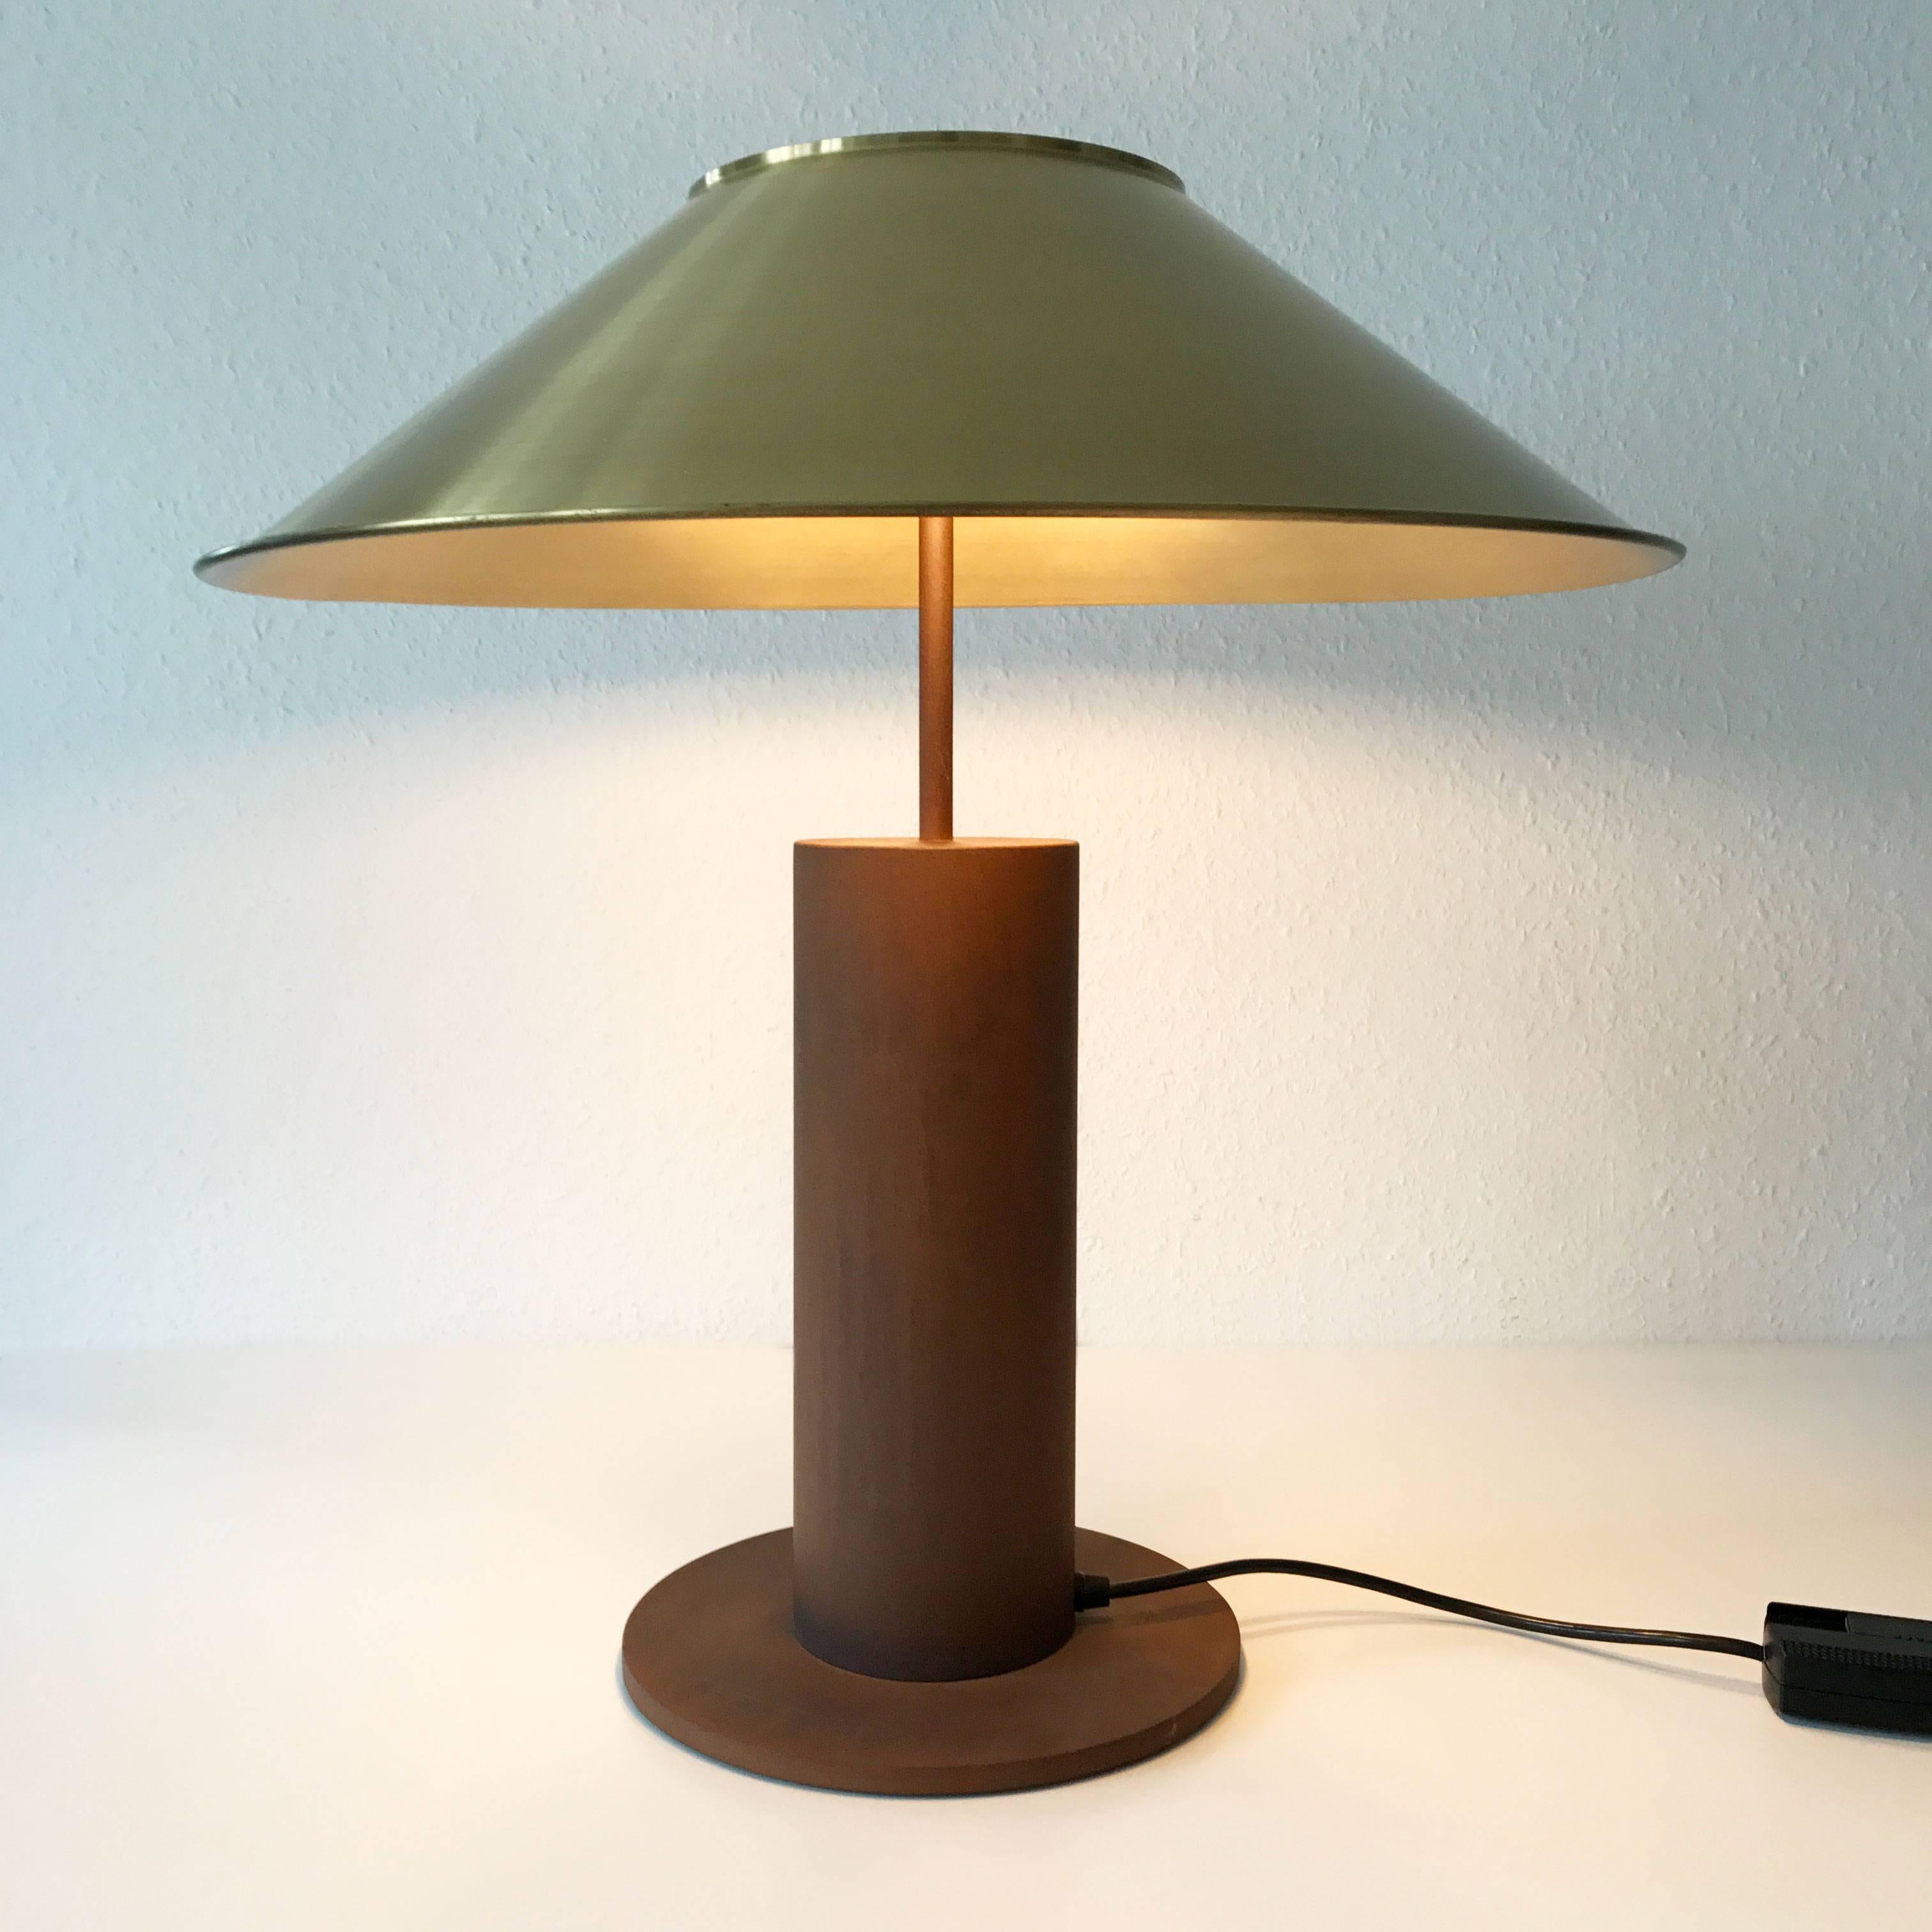 Large and rare Mid Century Modern table lamp. Designed by Peter Preller for Tecta, Germany, 1980s. With removable brass shade. 

Executed in brass and metal, the lamp comes with a dimmer and 2 x E27 / E26 Edison screw fit bulbs. It is with original